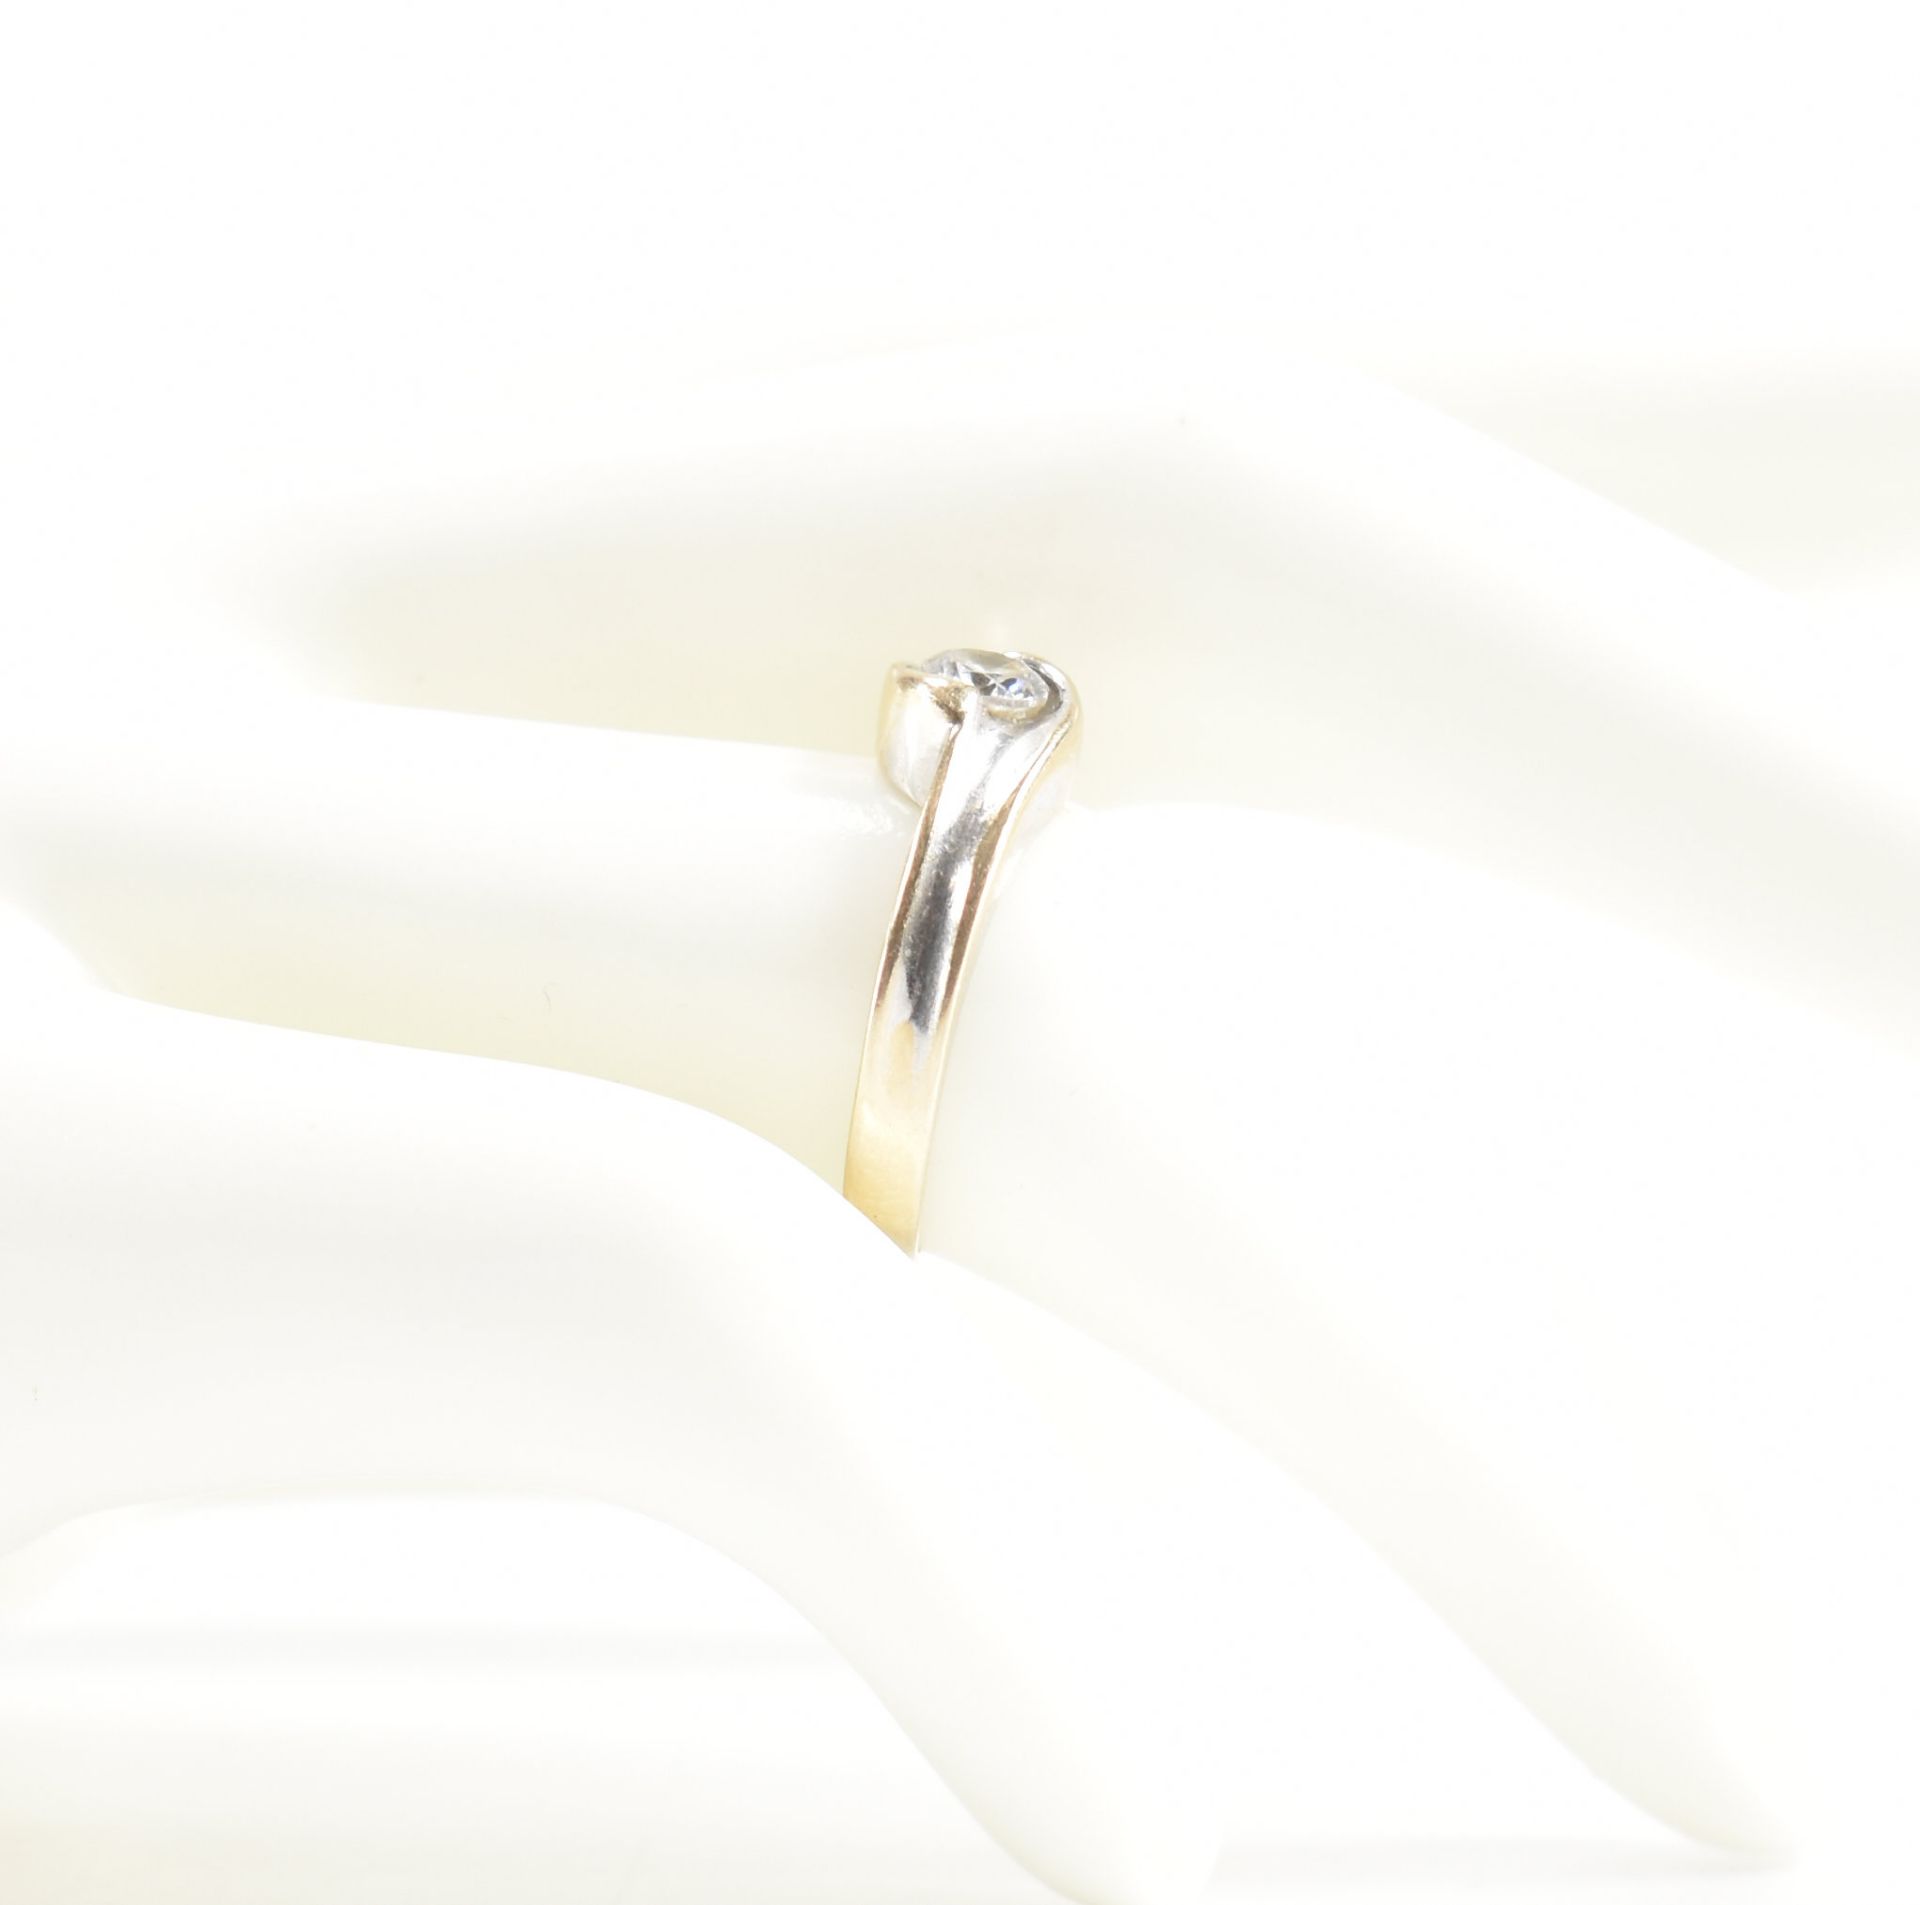 HALLMARKED 18CT WHITE GOLD SOLITAIRE RING - Image 8 of 8